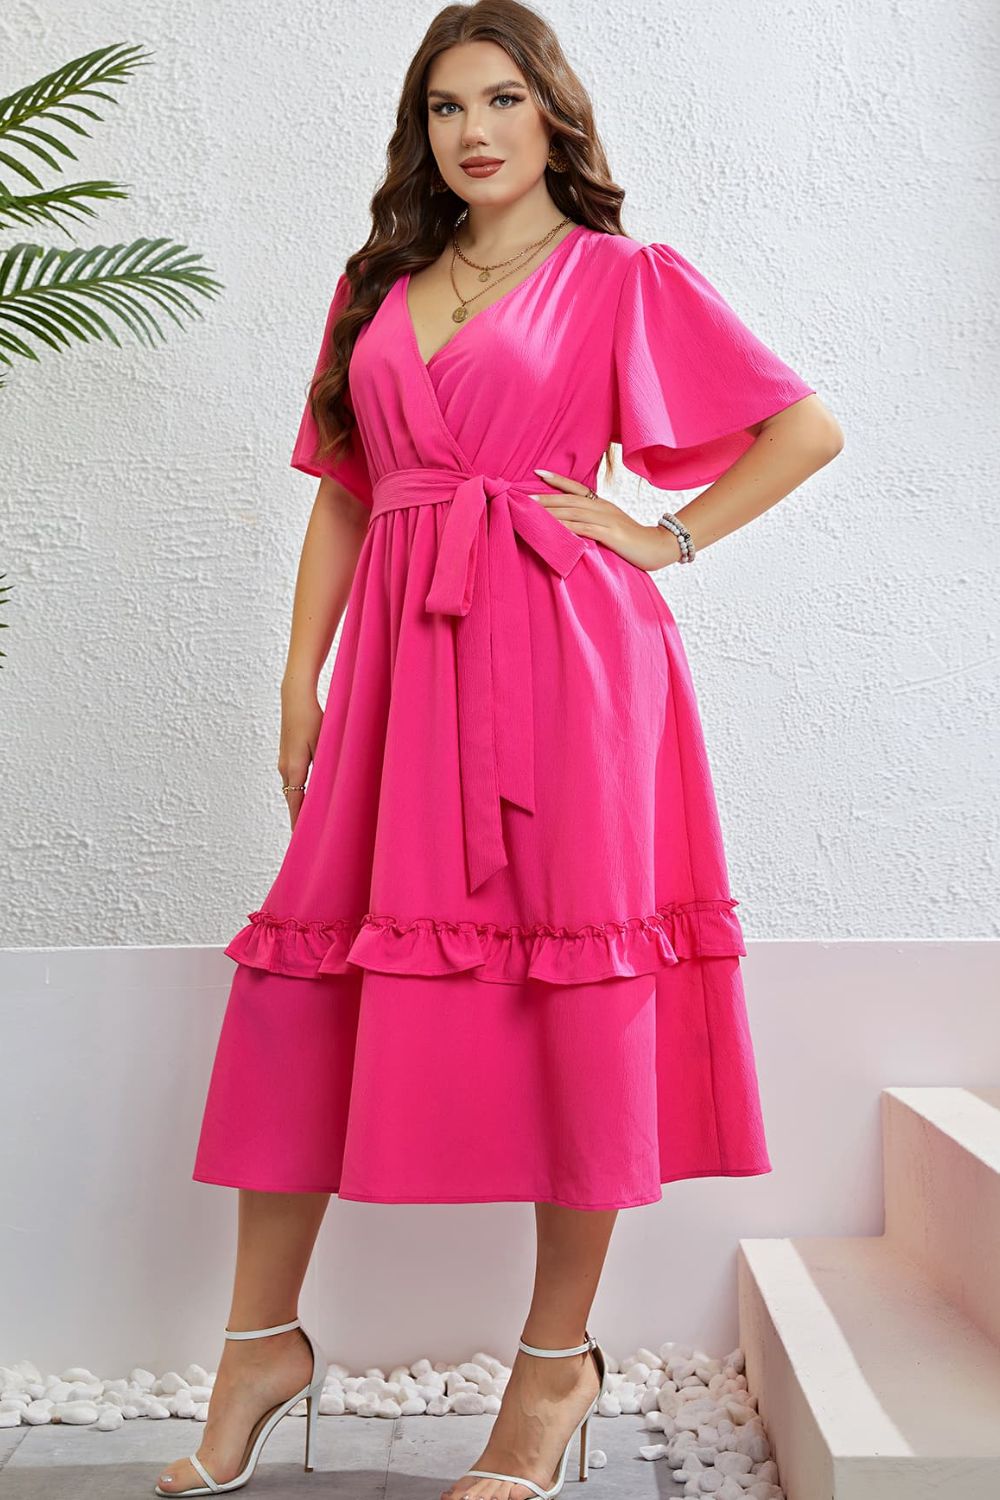 Belted Plus Size Pink Ruffle Dress up to 4XL